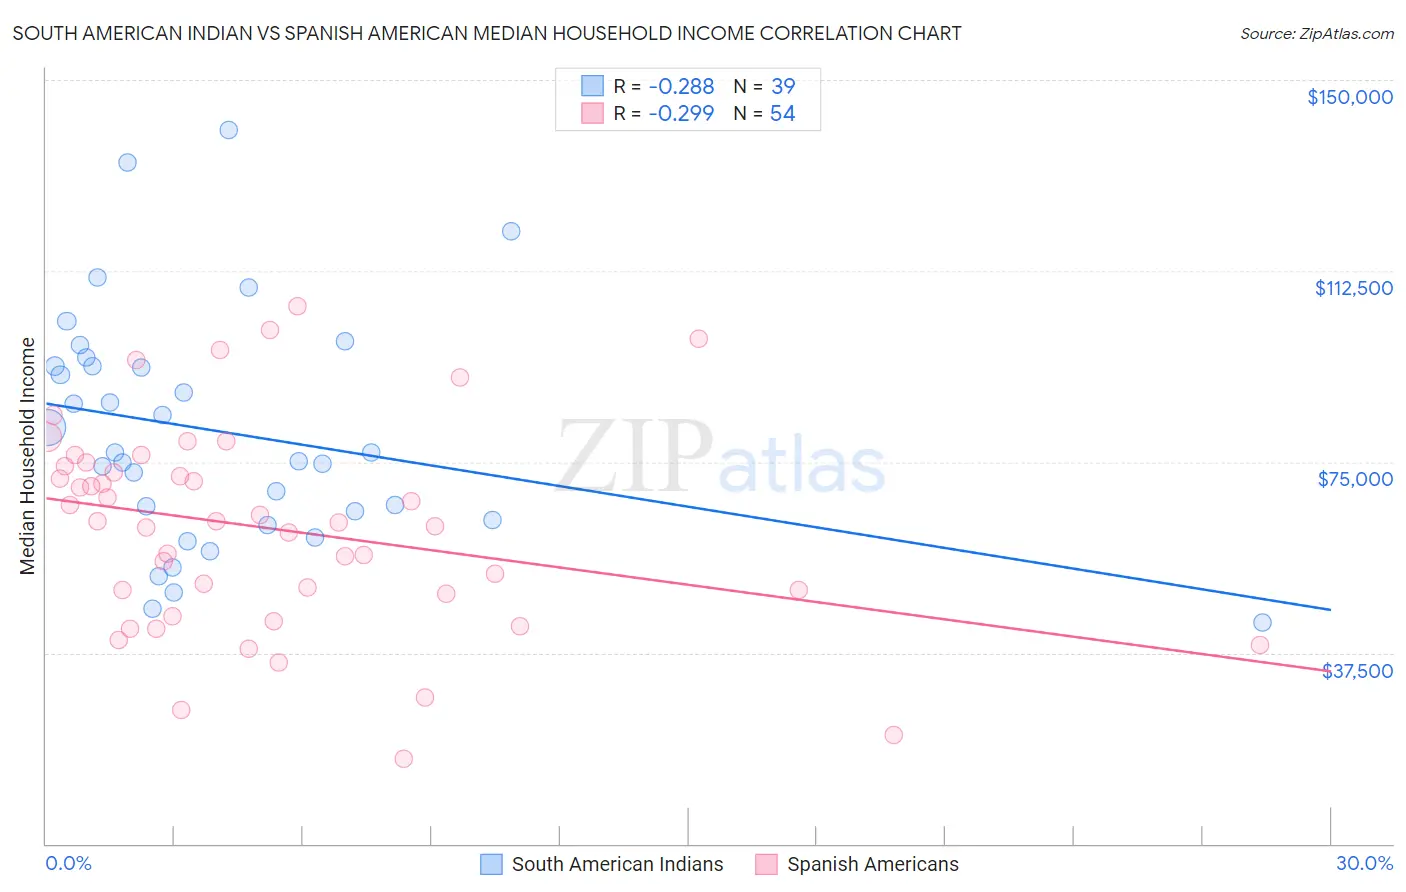 South American Indian vs Spanish American Median Household Income